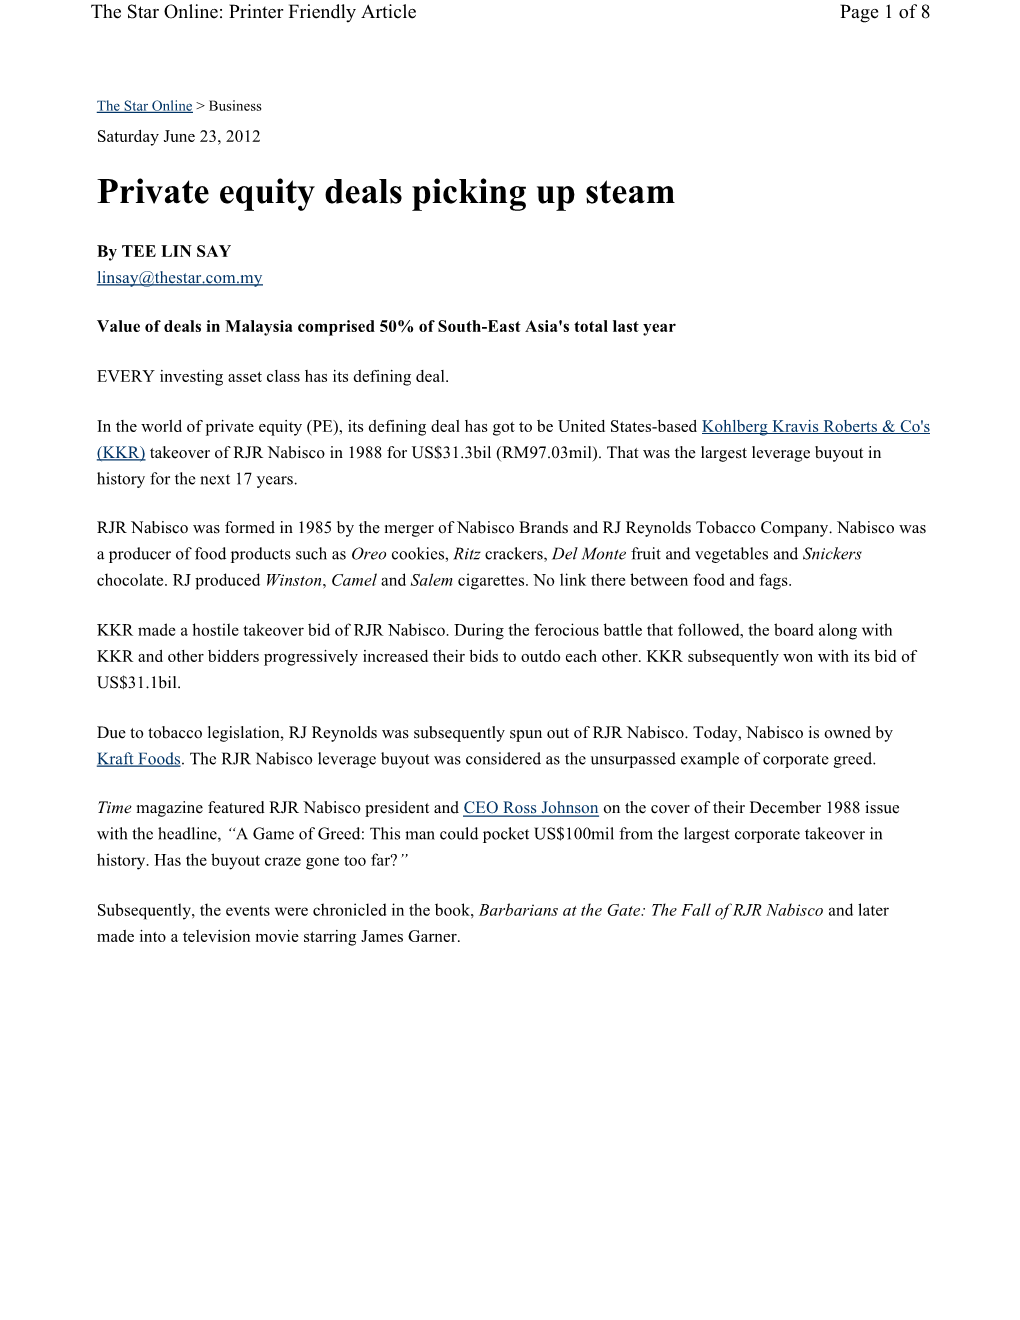 Private Equity Deals Picking up Steam